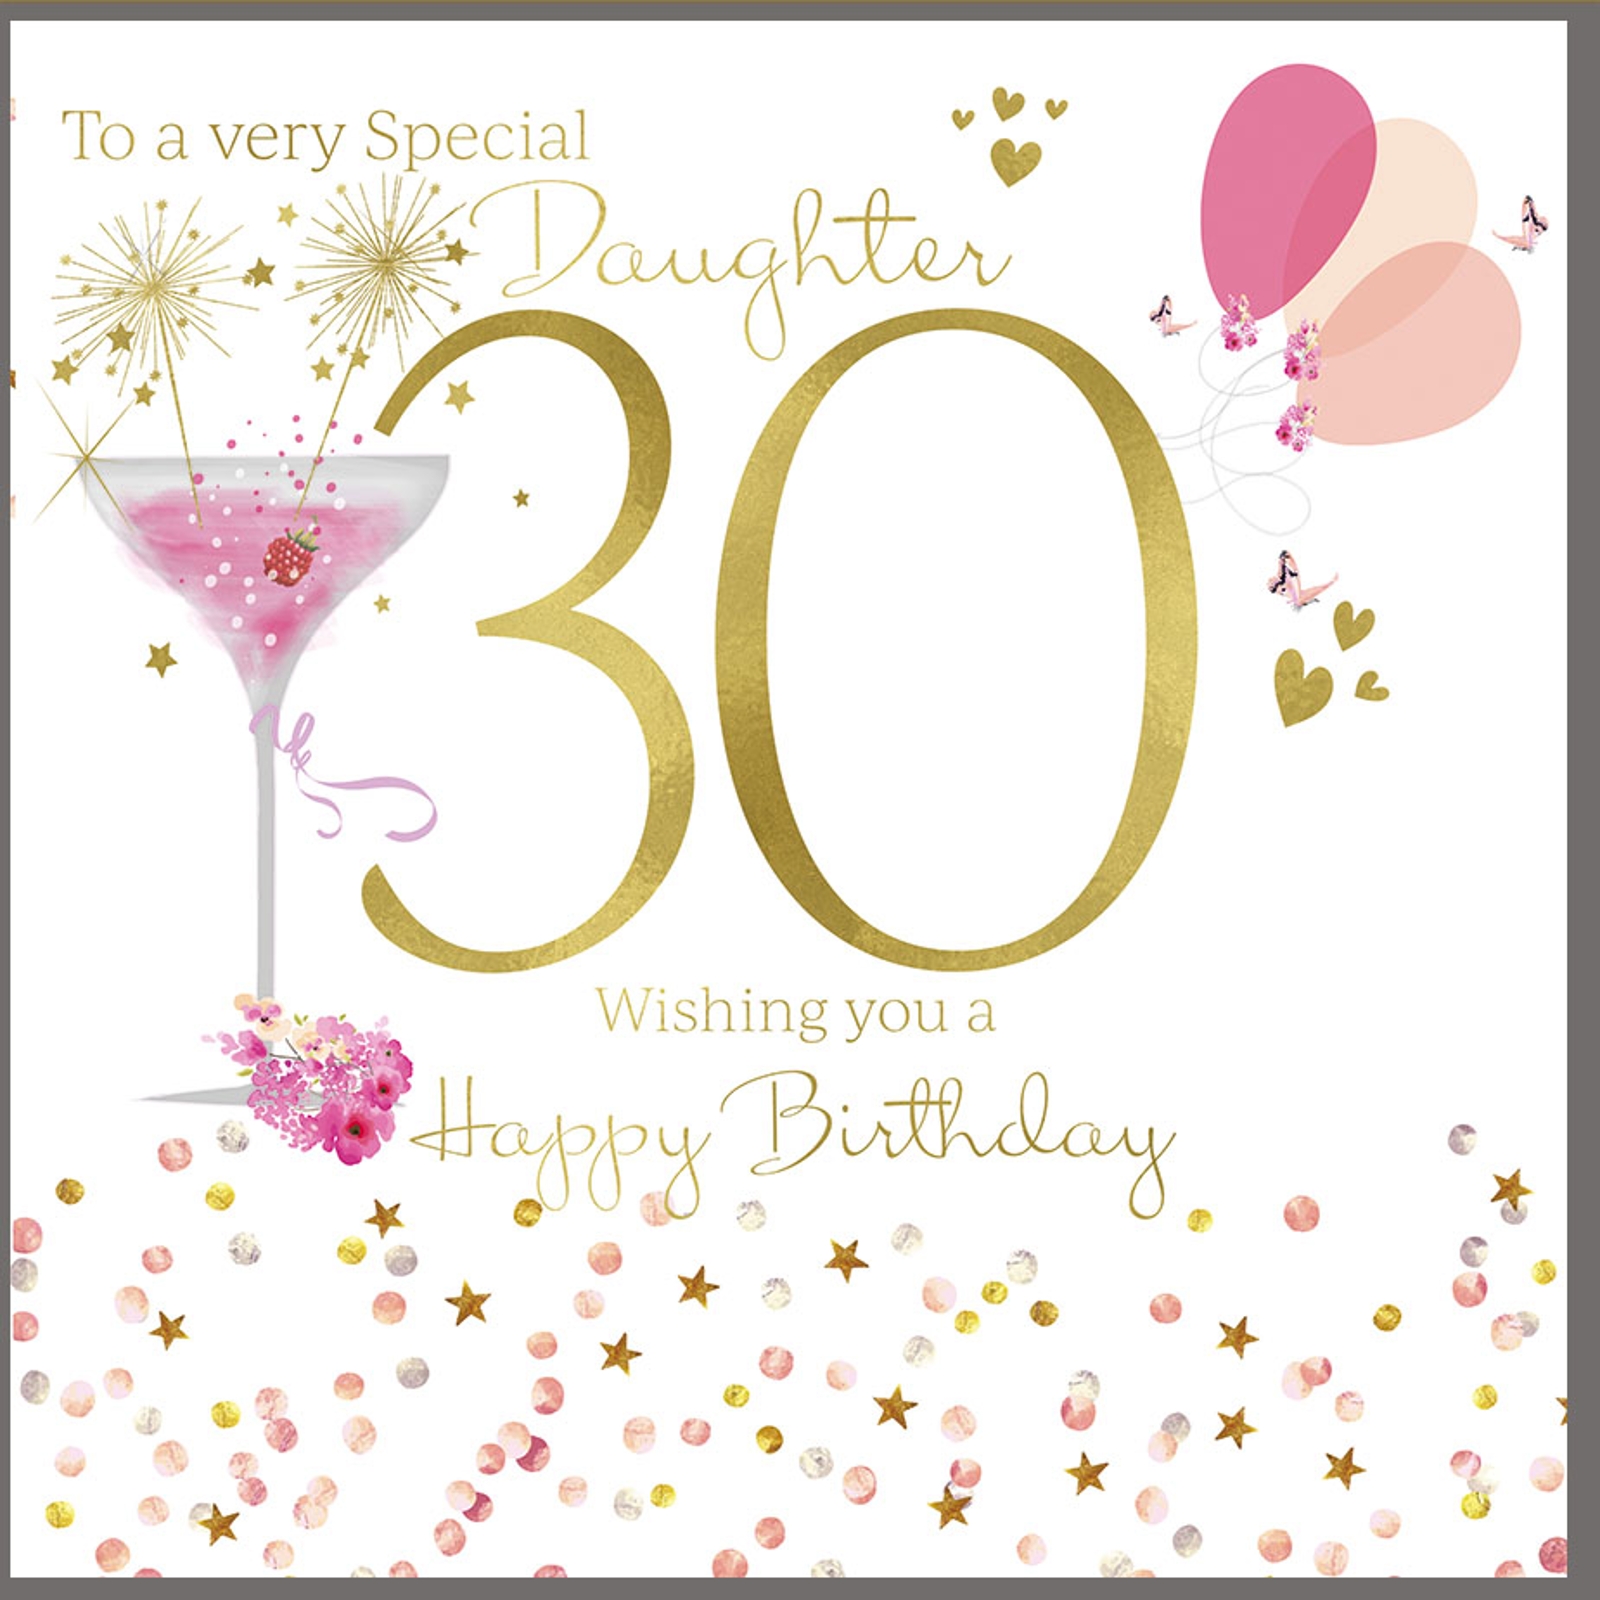 30th Birthday Card Ideas For Daughter - Printable Templates Free